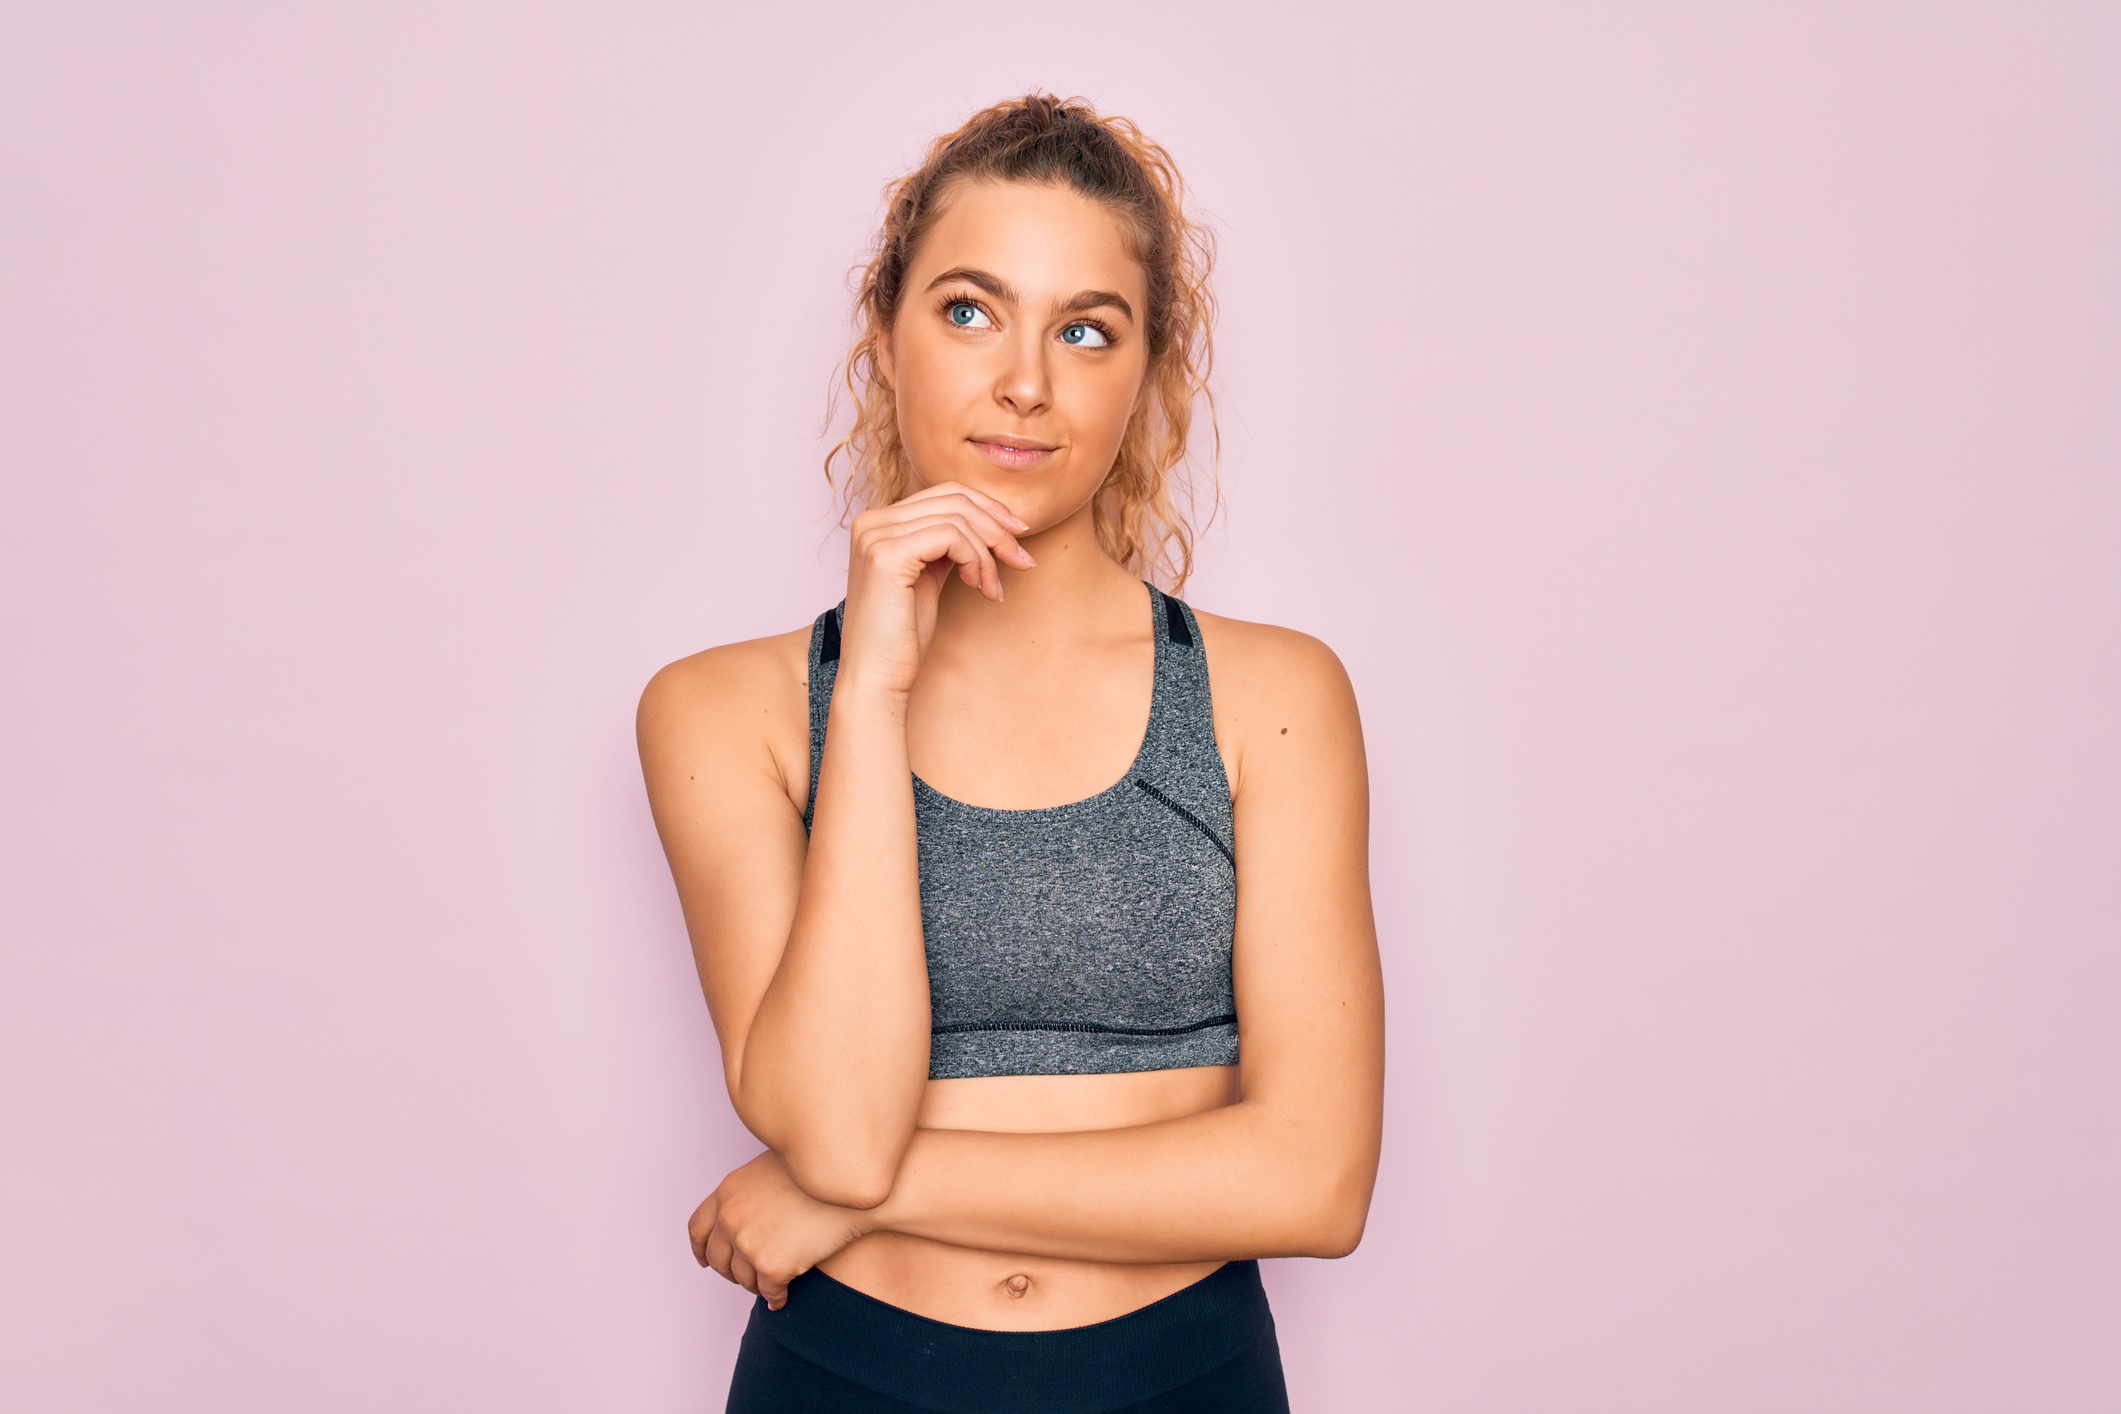 Woman thinking; how to choose a fitness niche